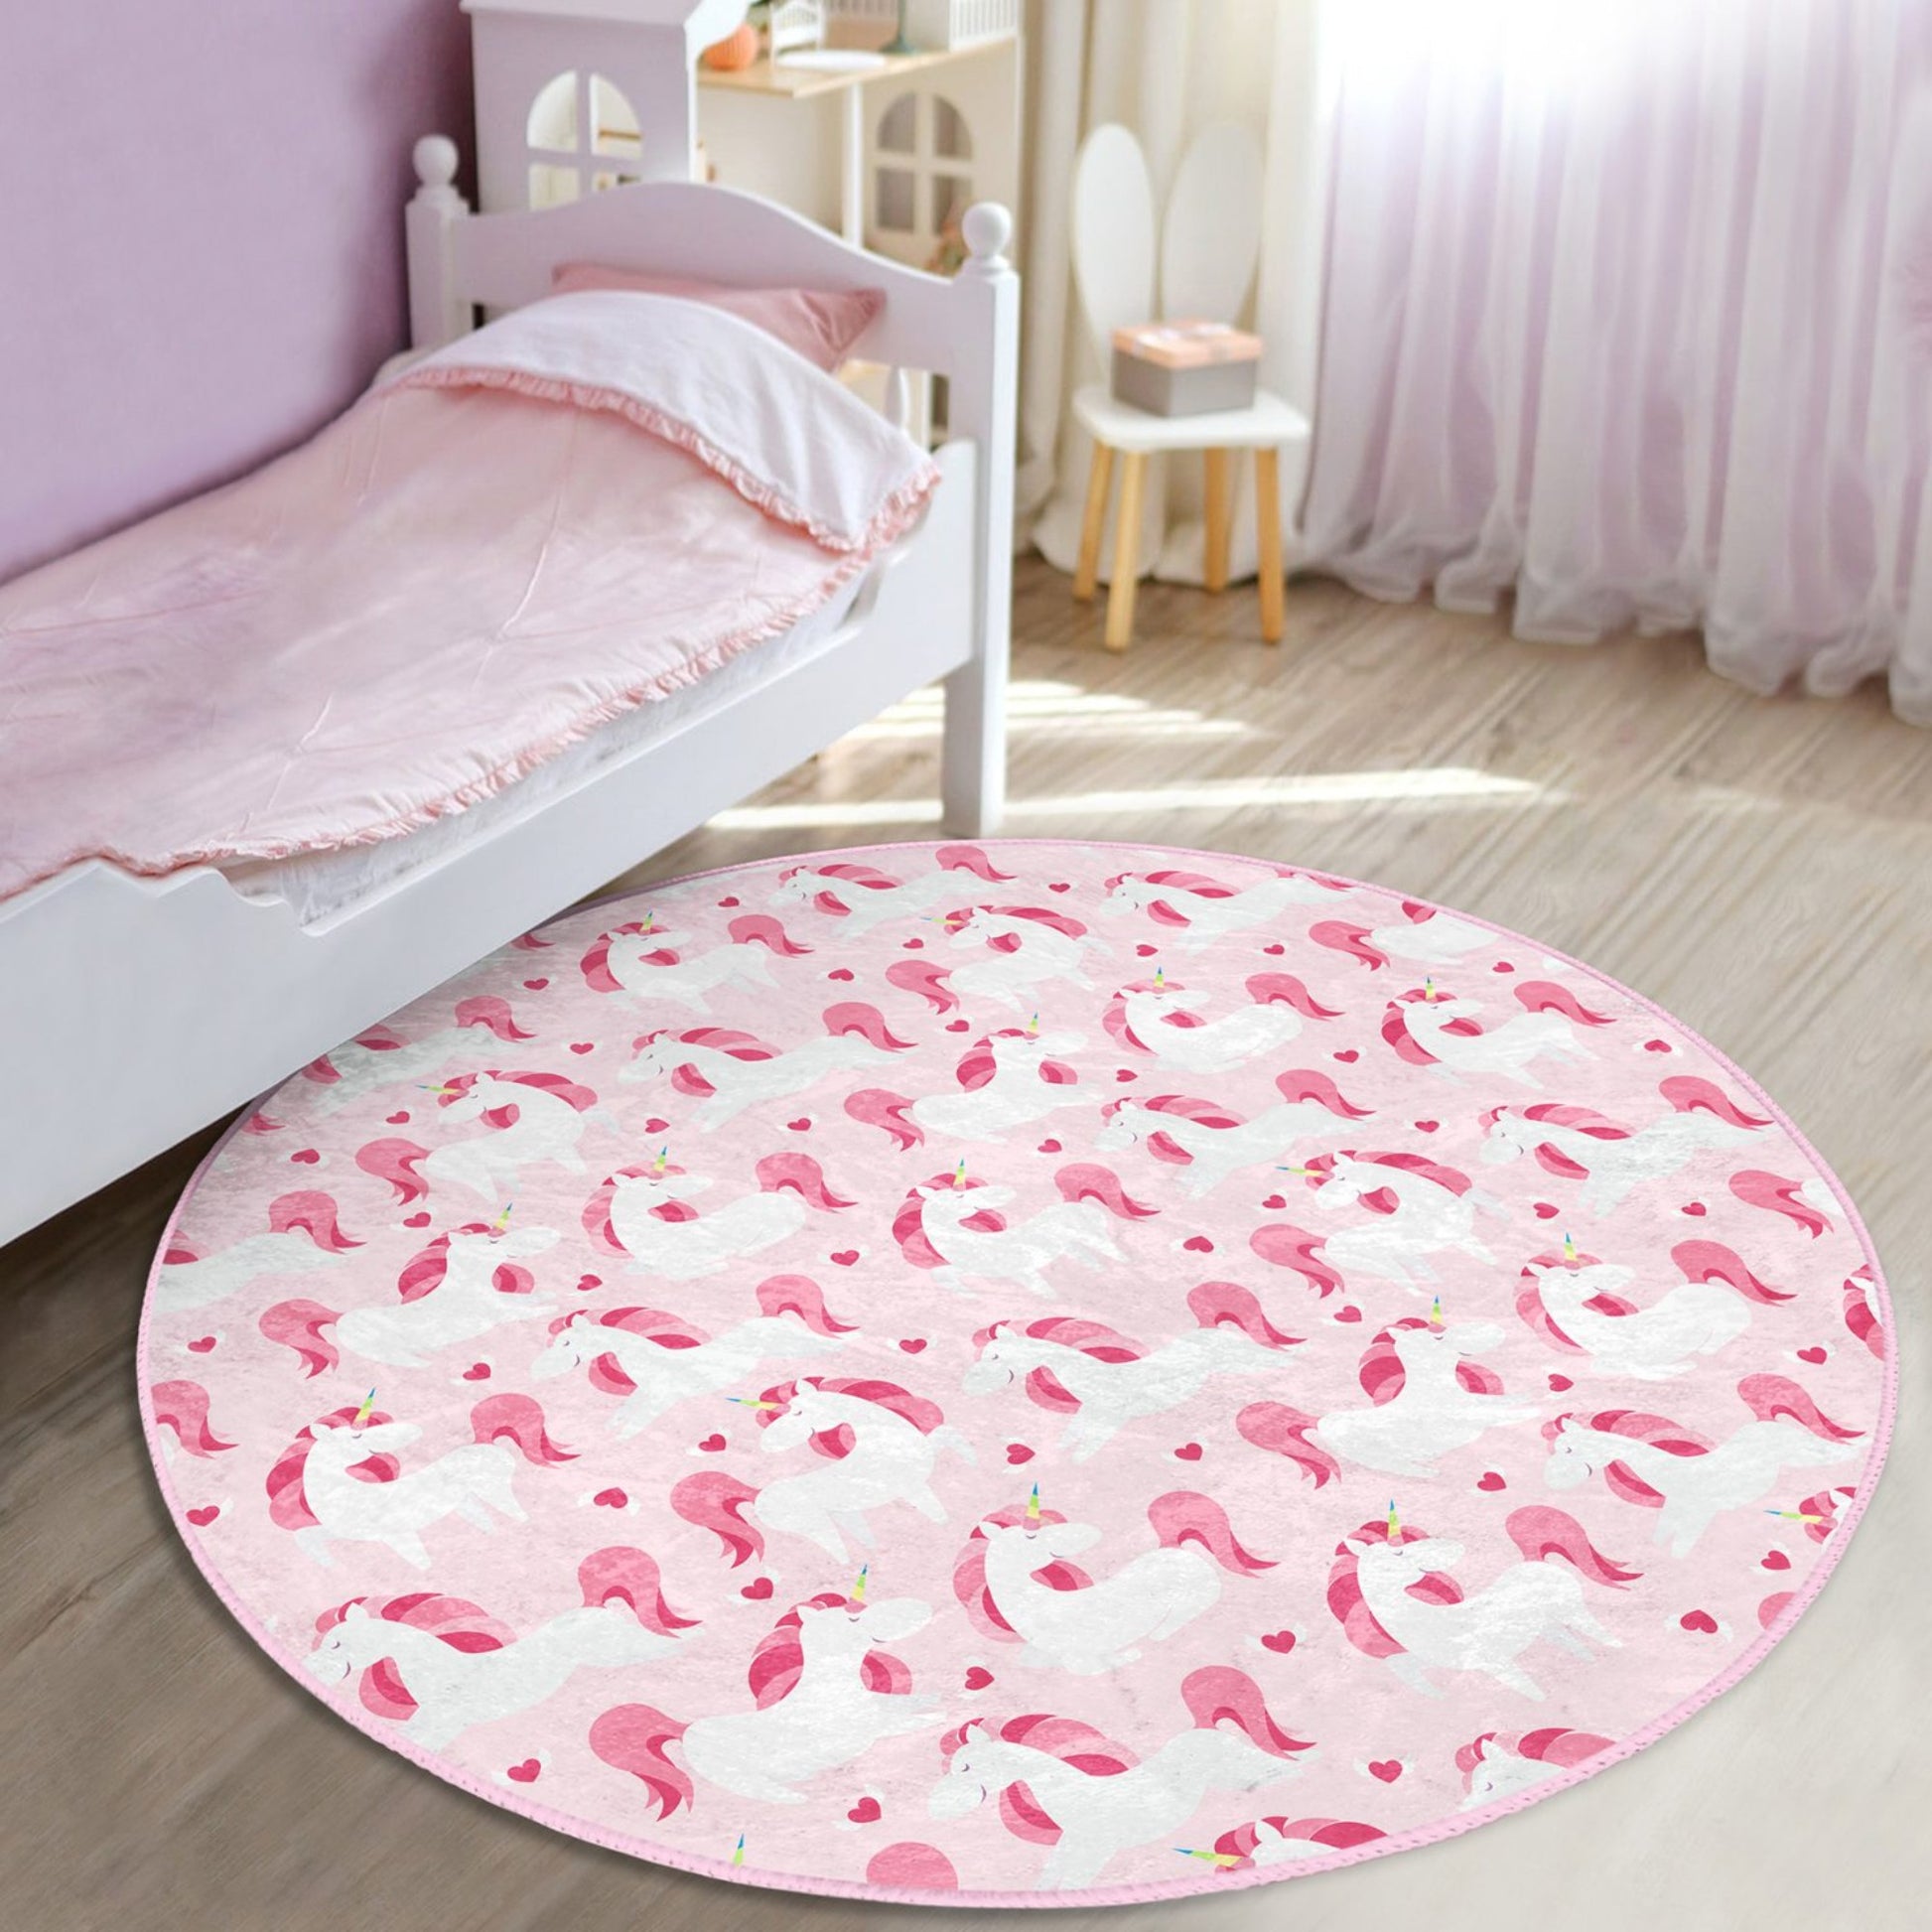 Durable Rug with Whimsical Unicorn Pattern